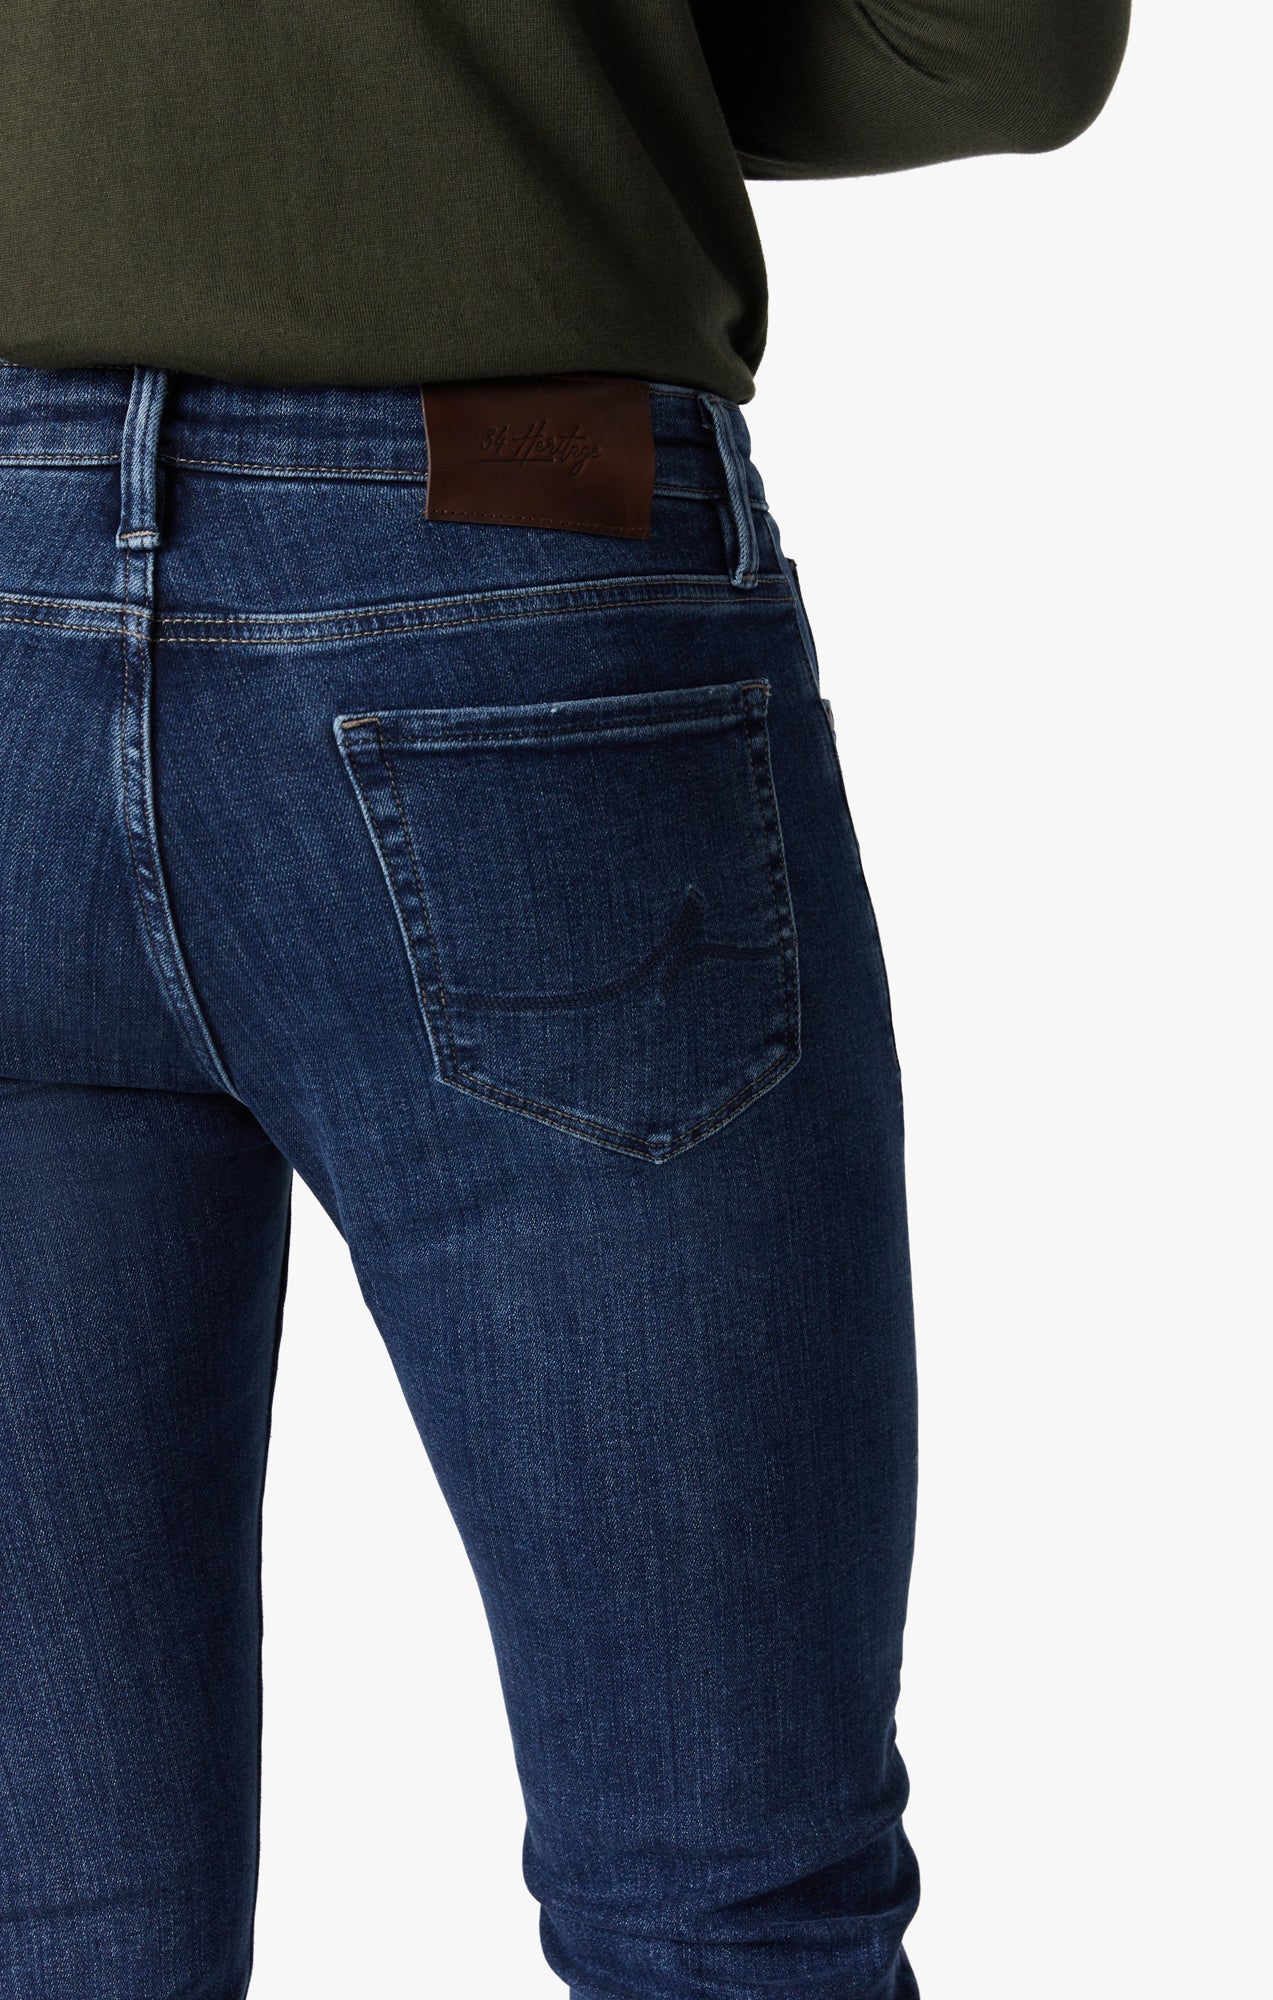 Courage Straight Leg Jeans in Deep Brushed Organic Image 5